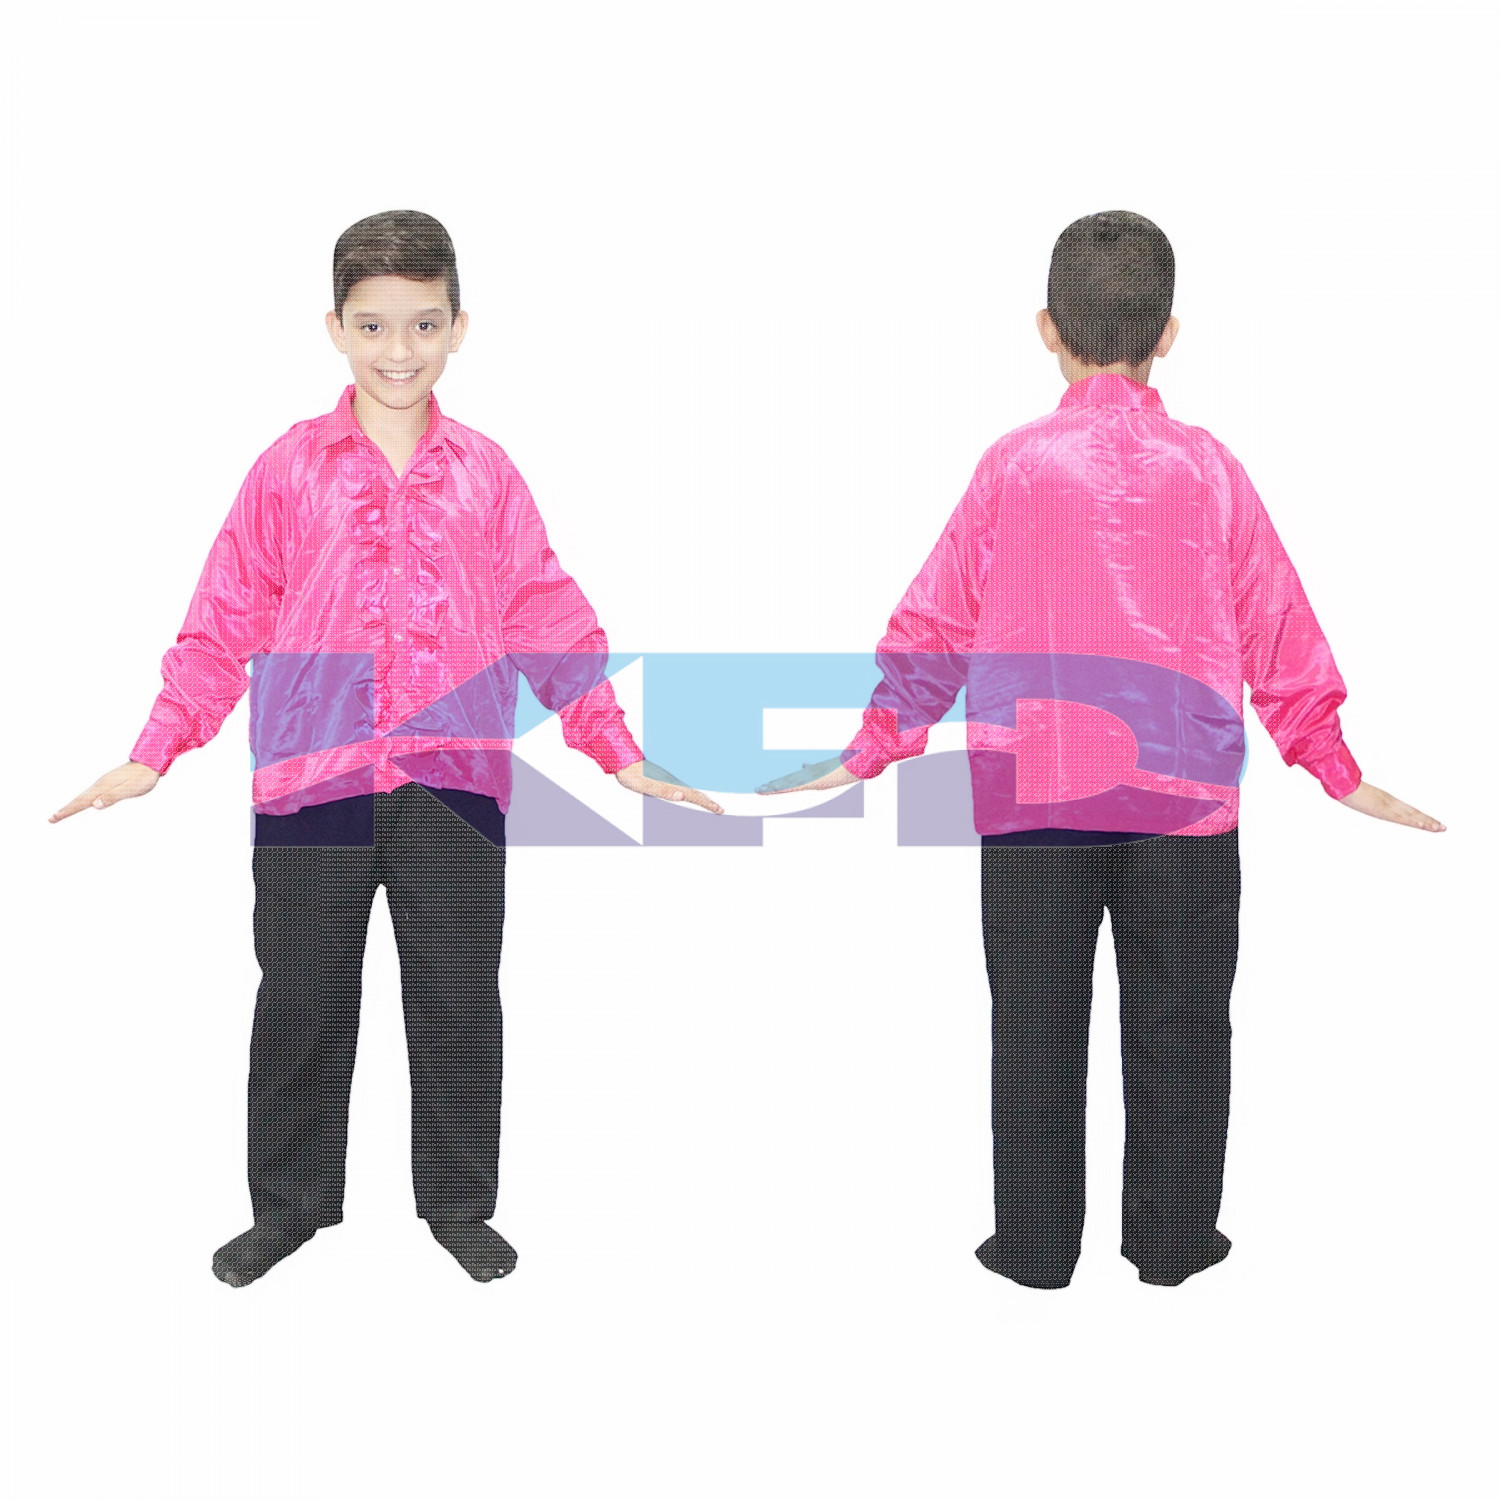 Mazanta frill Shirt fancy dress for kids,Western Costume for Annual function/Theme Party/Competition/Stage Shows/Birthday Party Dress laten dance/salsa dance